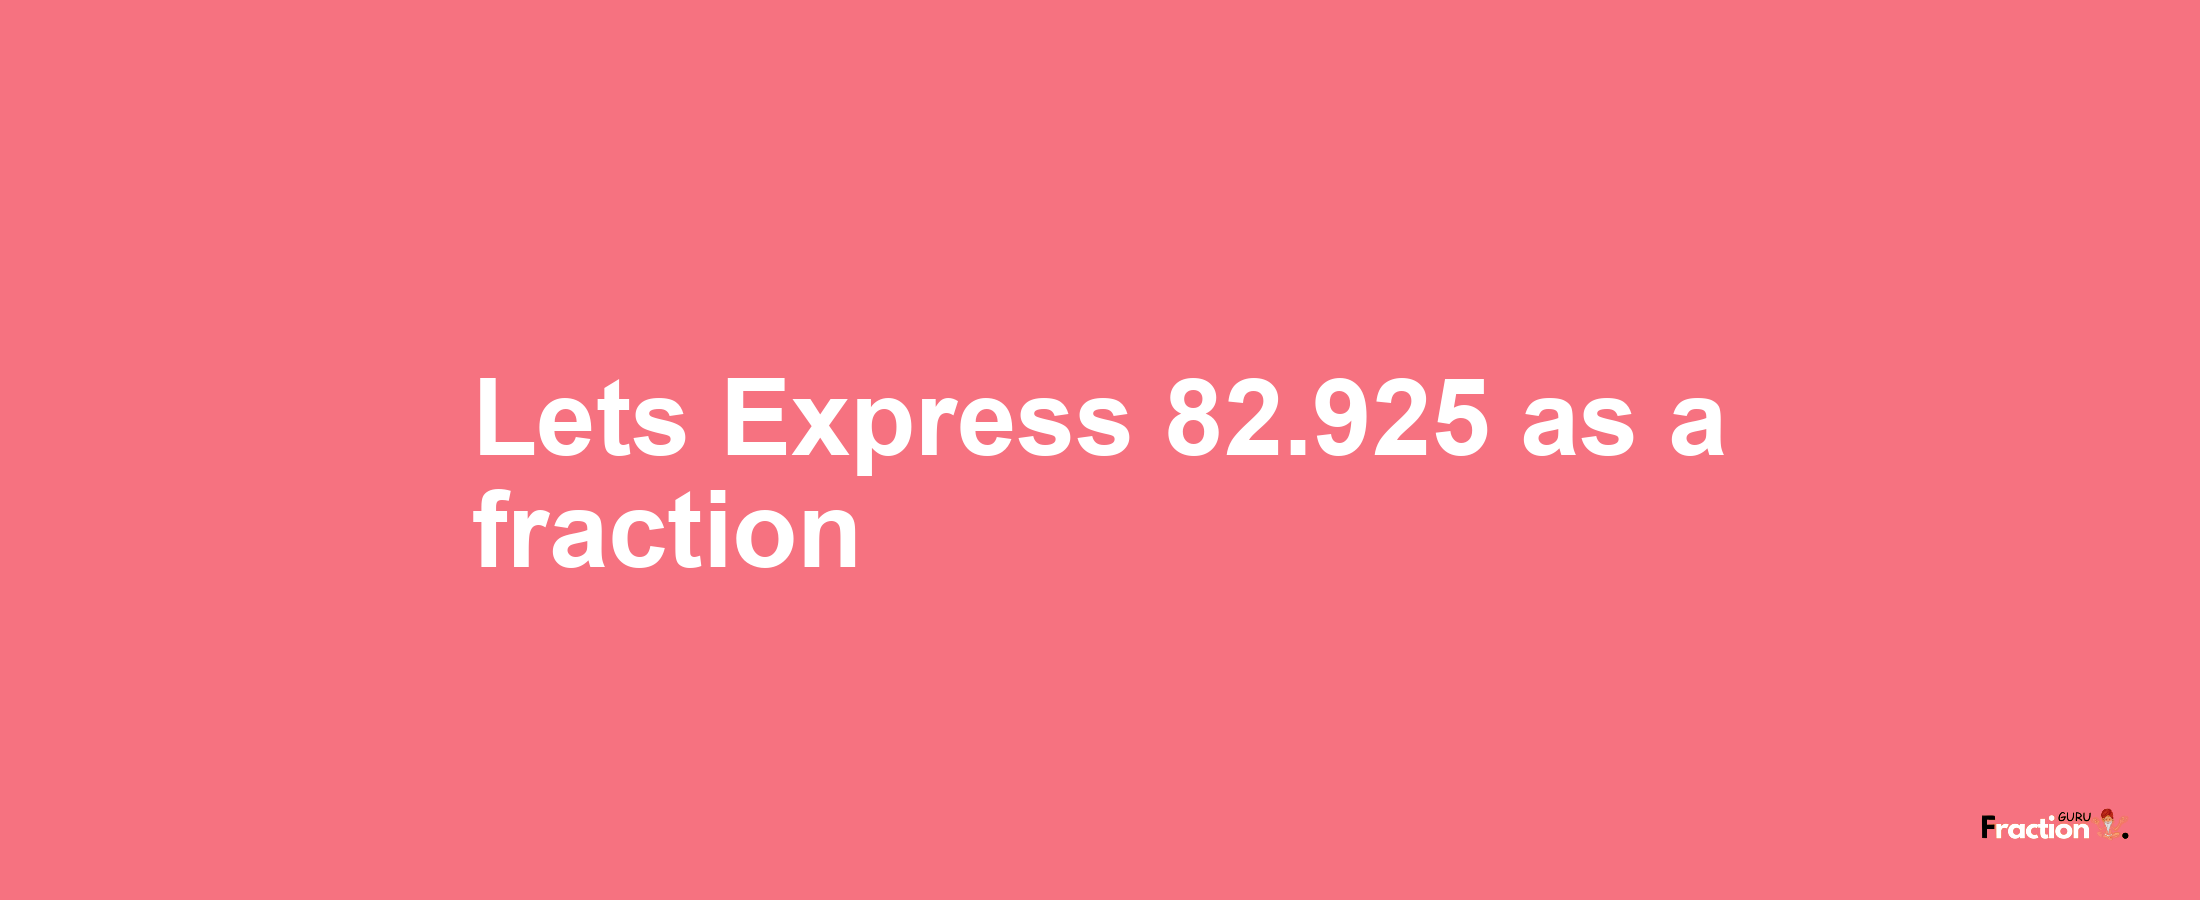 Lets Express 82.925 as afraction